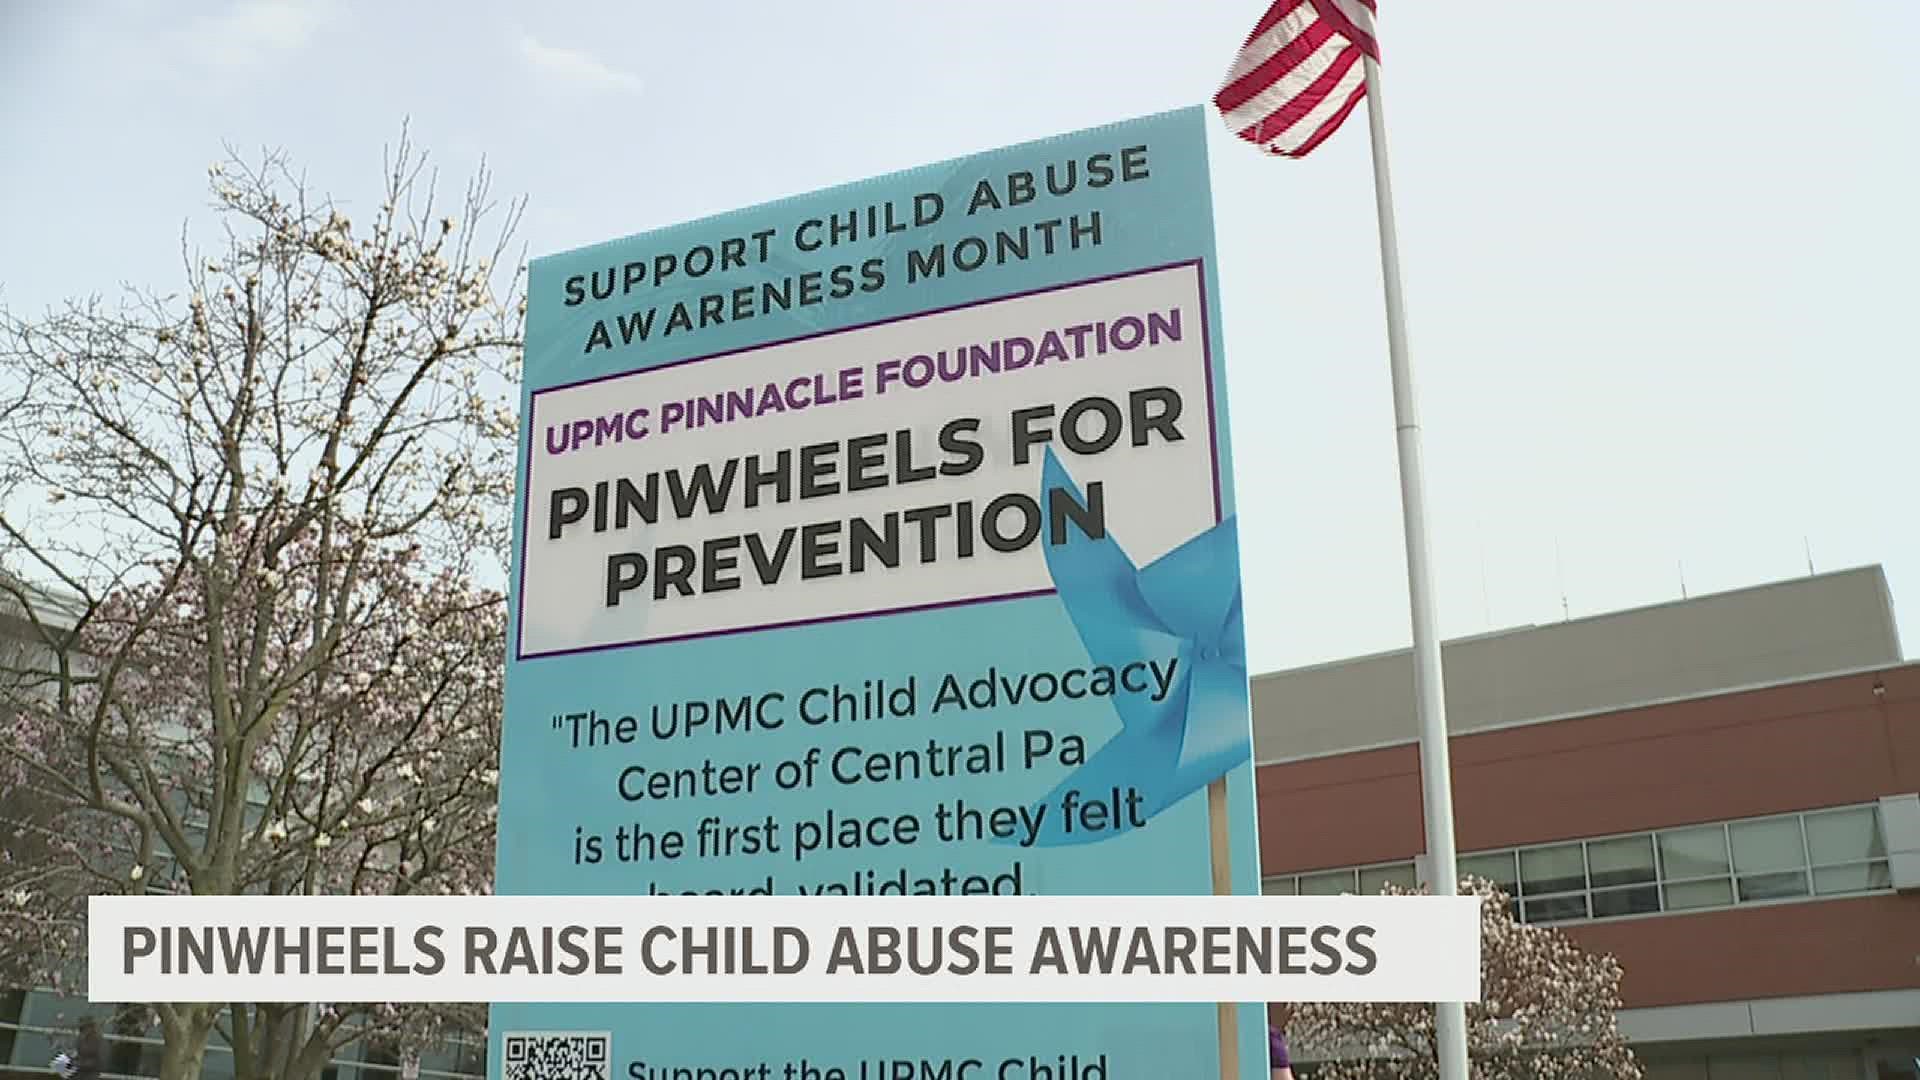 April is National Child Abuse Prevention Month and the UPMC Child Advocacy Center of Central Pa. and the UPMC Pinnacle Foundation are shining a light on it.